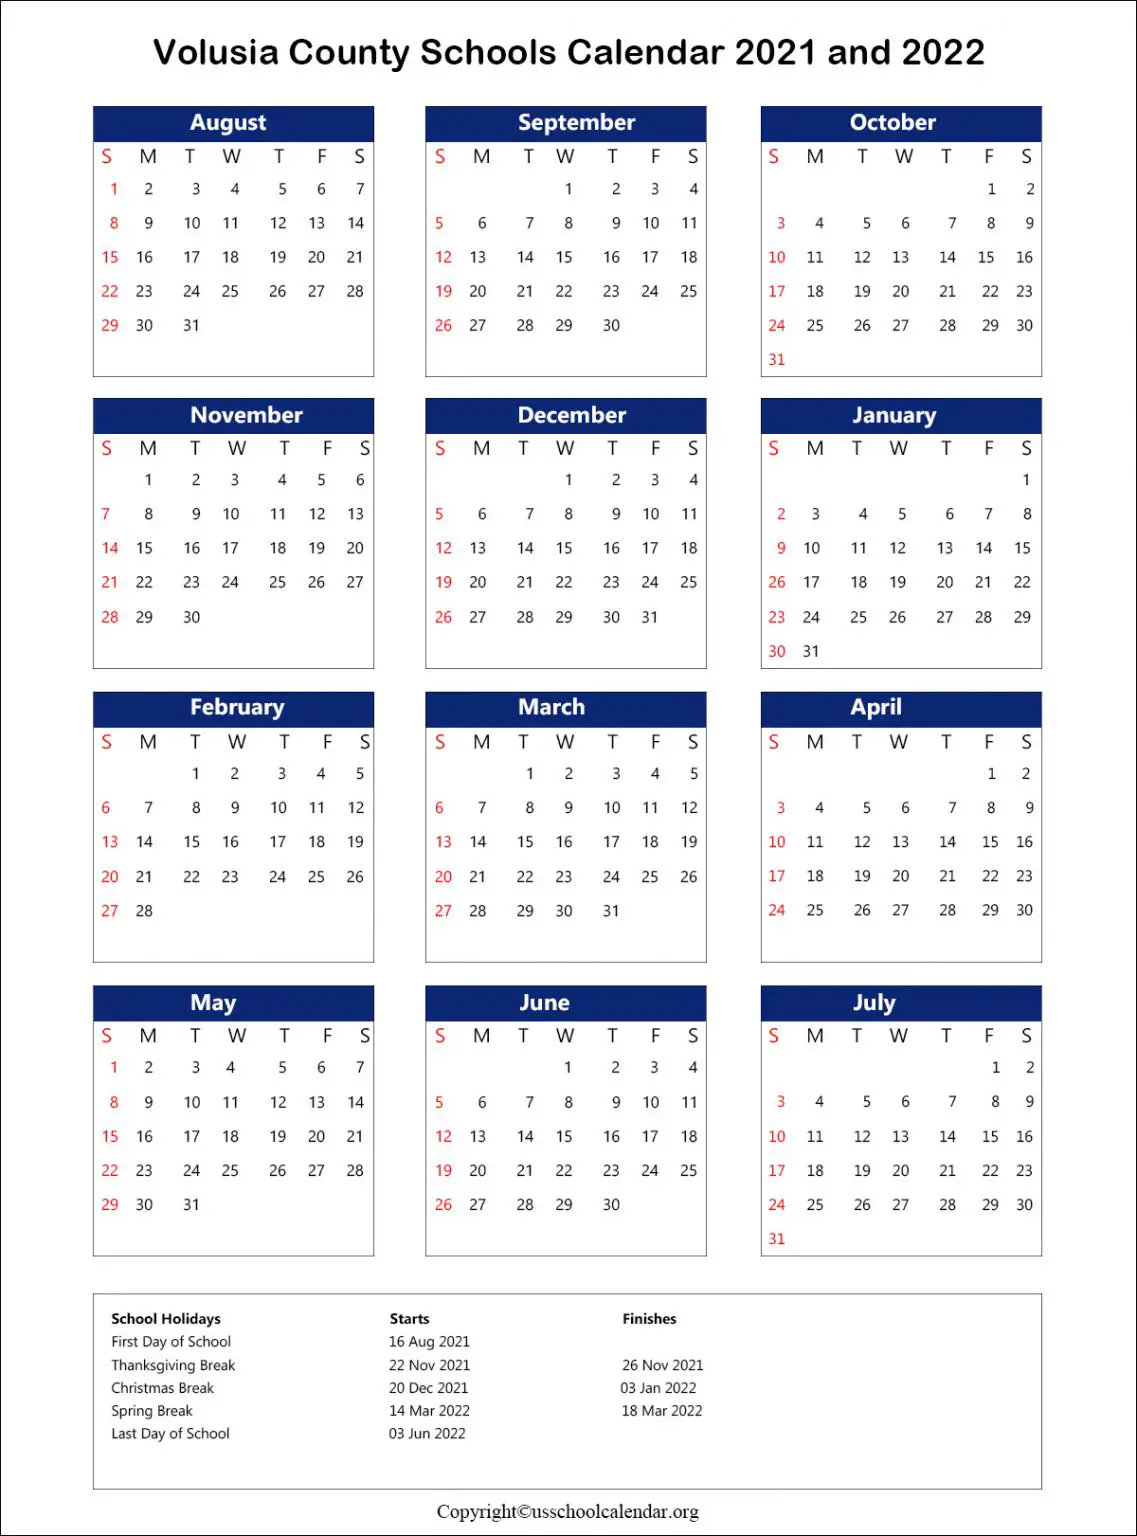 Volusia County School Calendar with Holidays 20212022